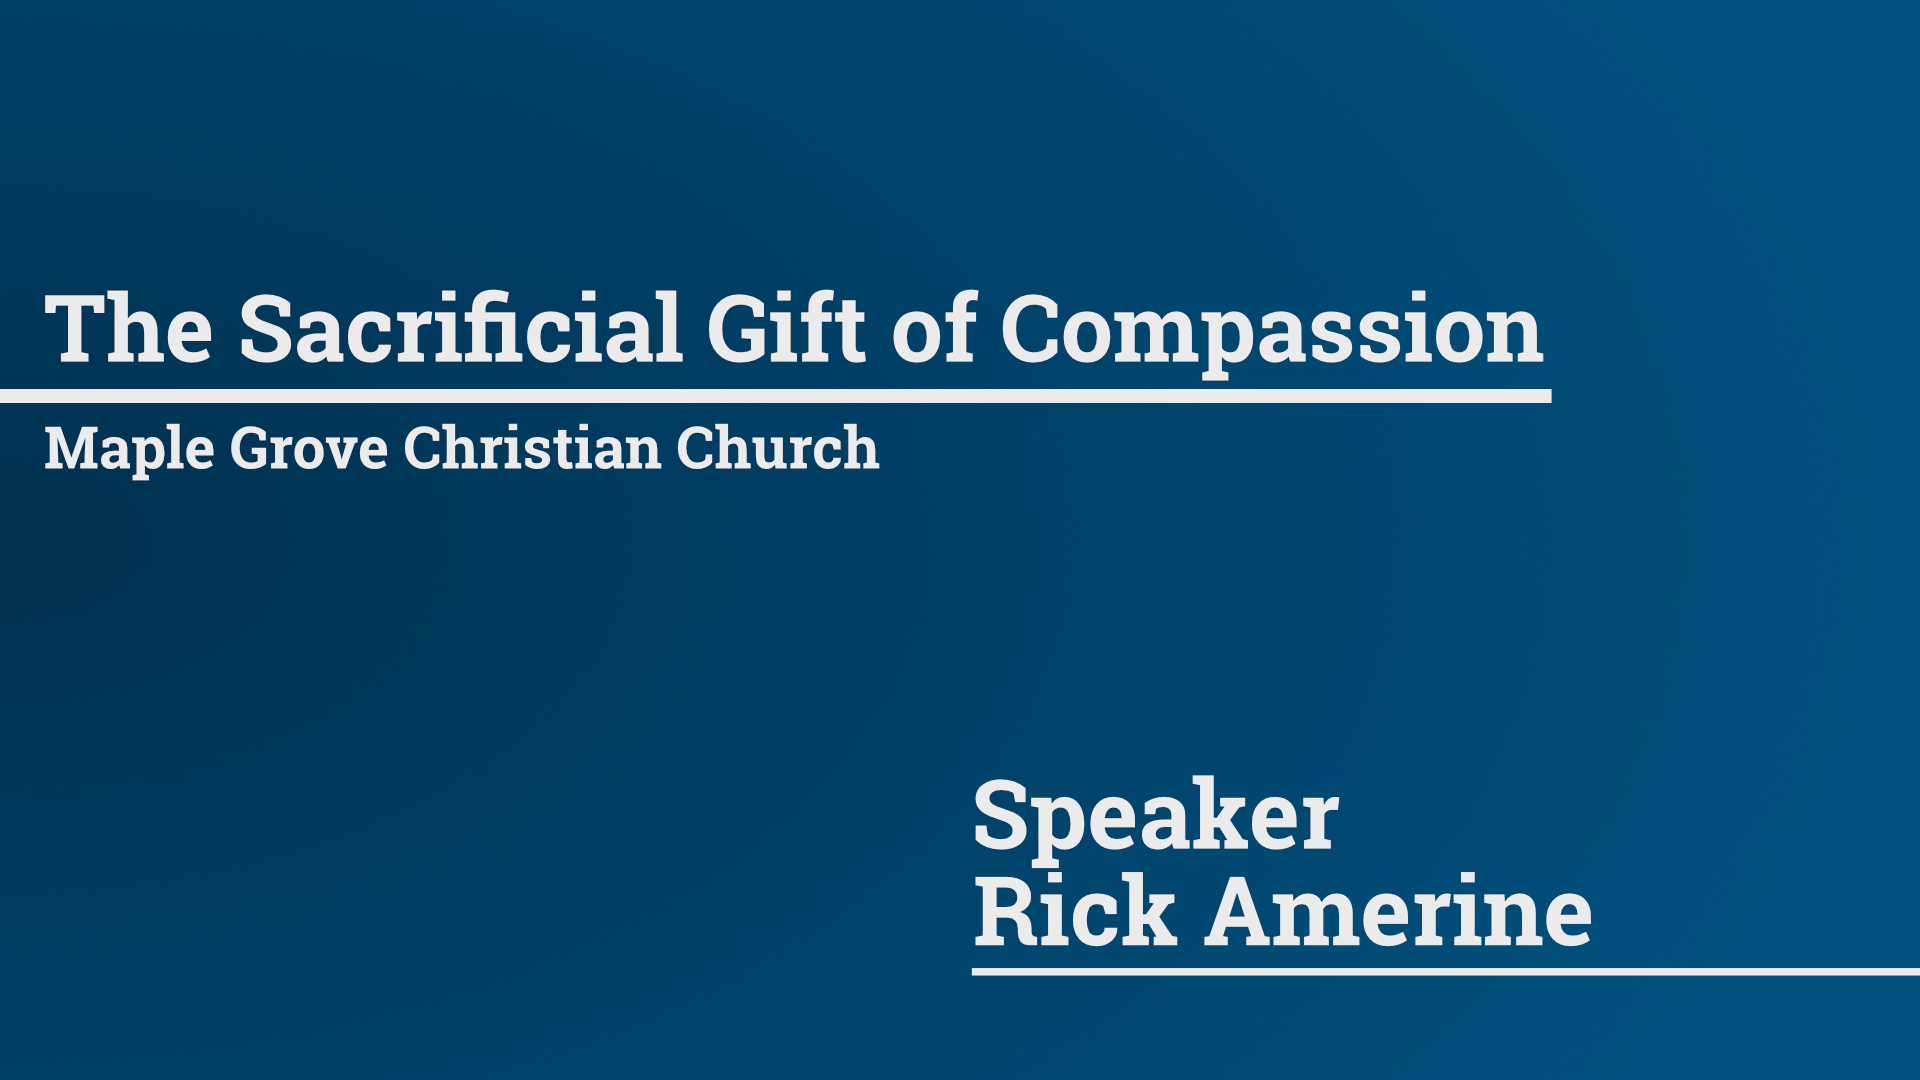 The Sacrificial Gift of Compassion • March 6, 2016